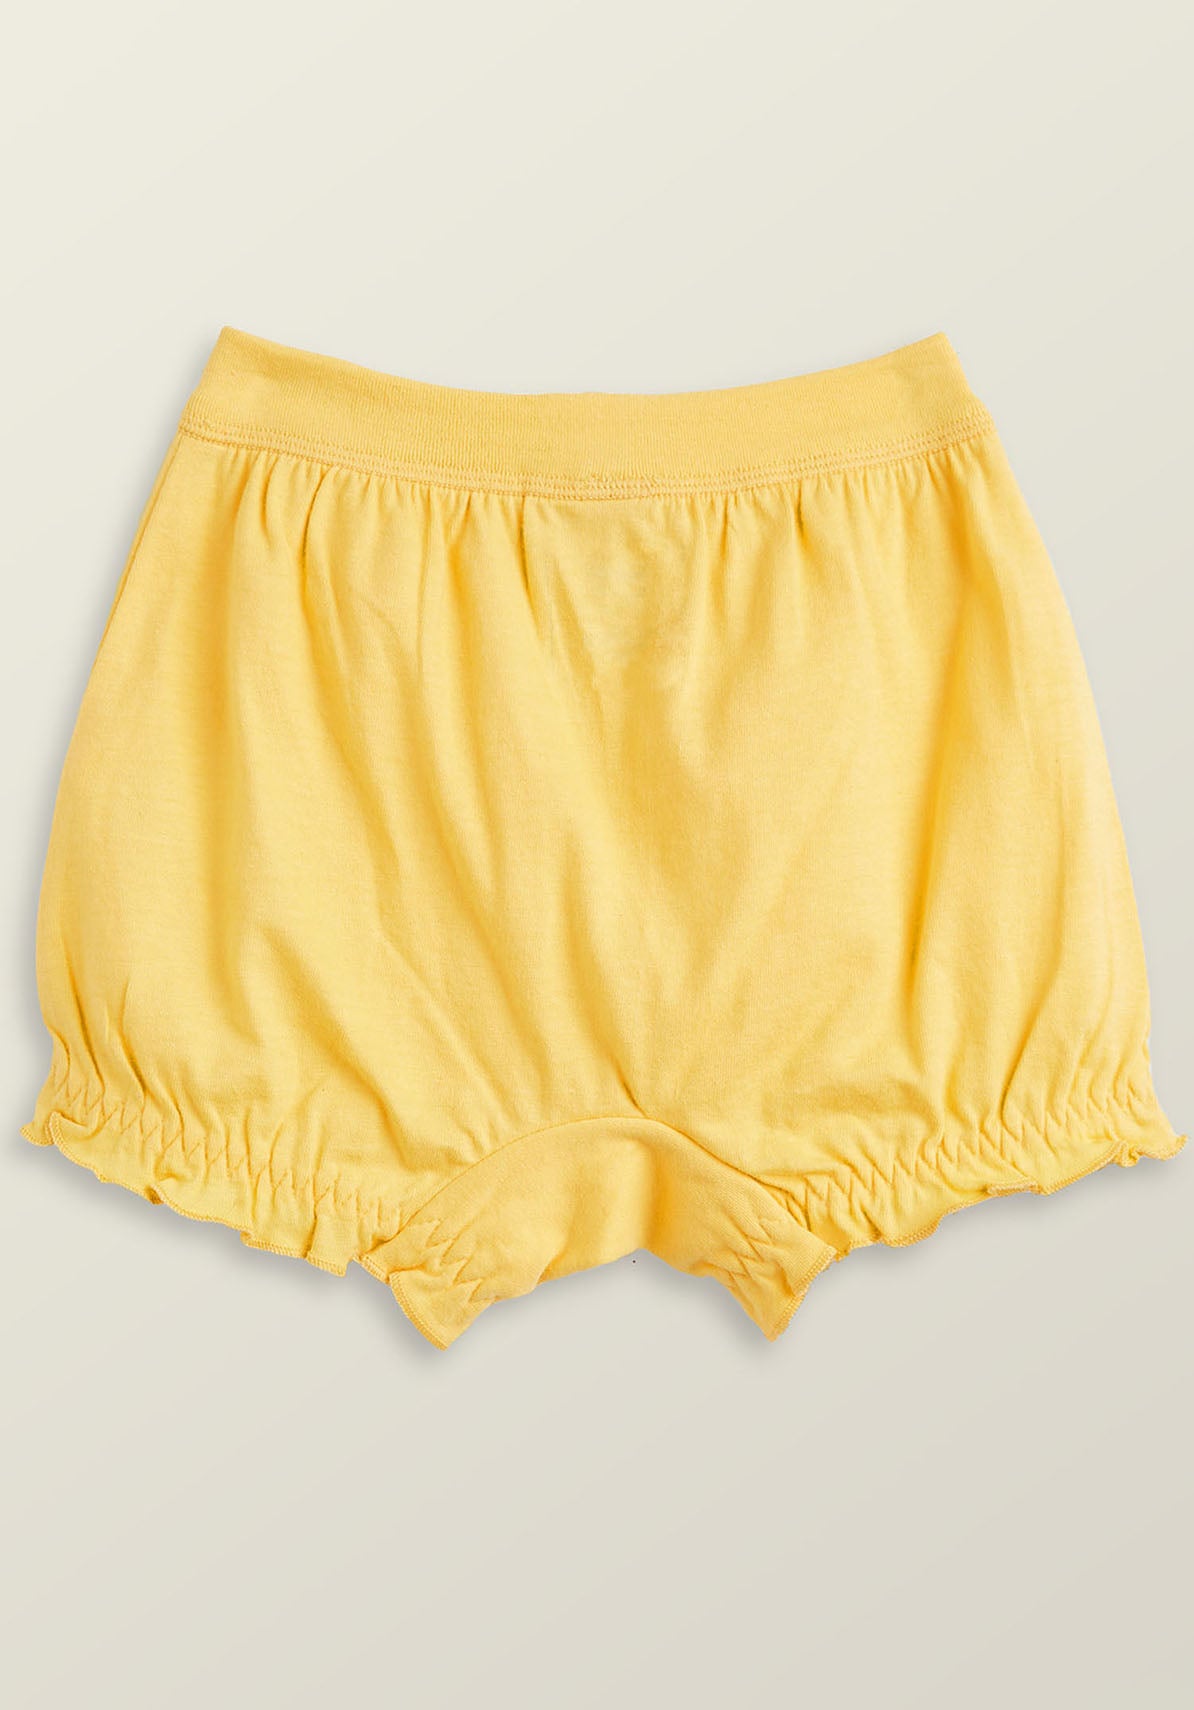 Girls bloomers scribbles raincloud combed cotton yellow - XYLife Kids Wear